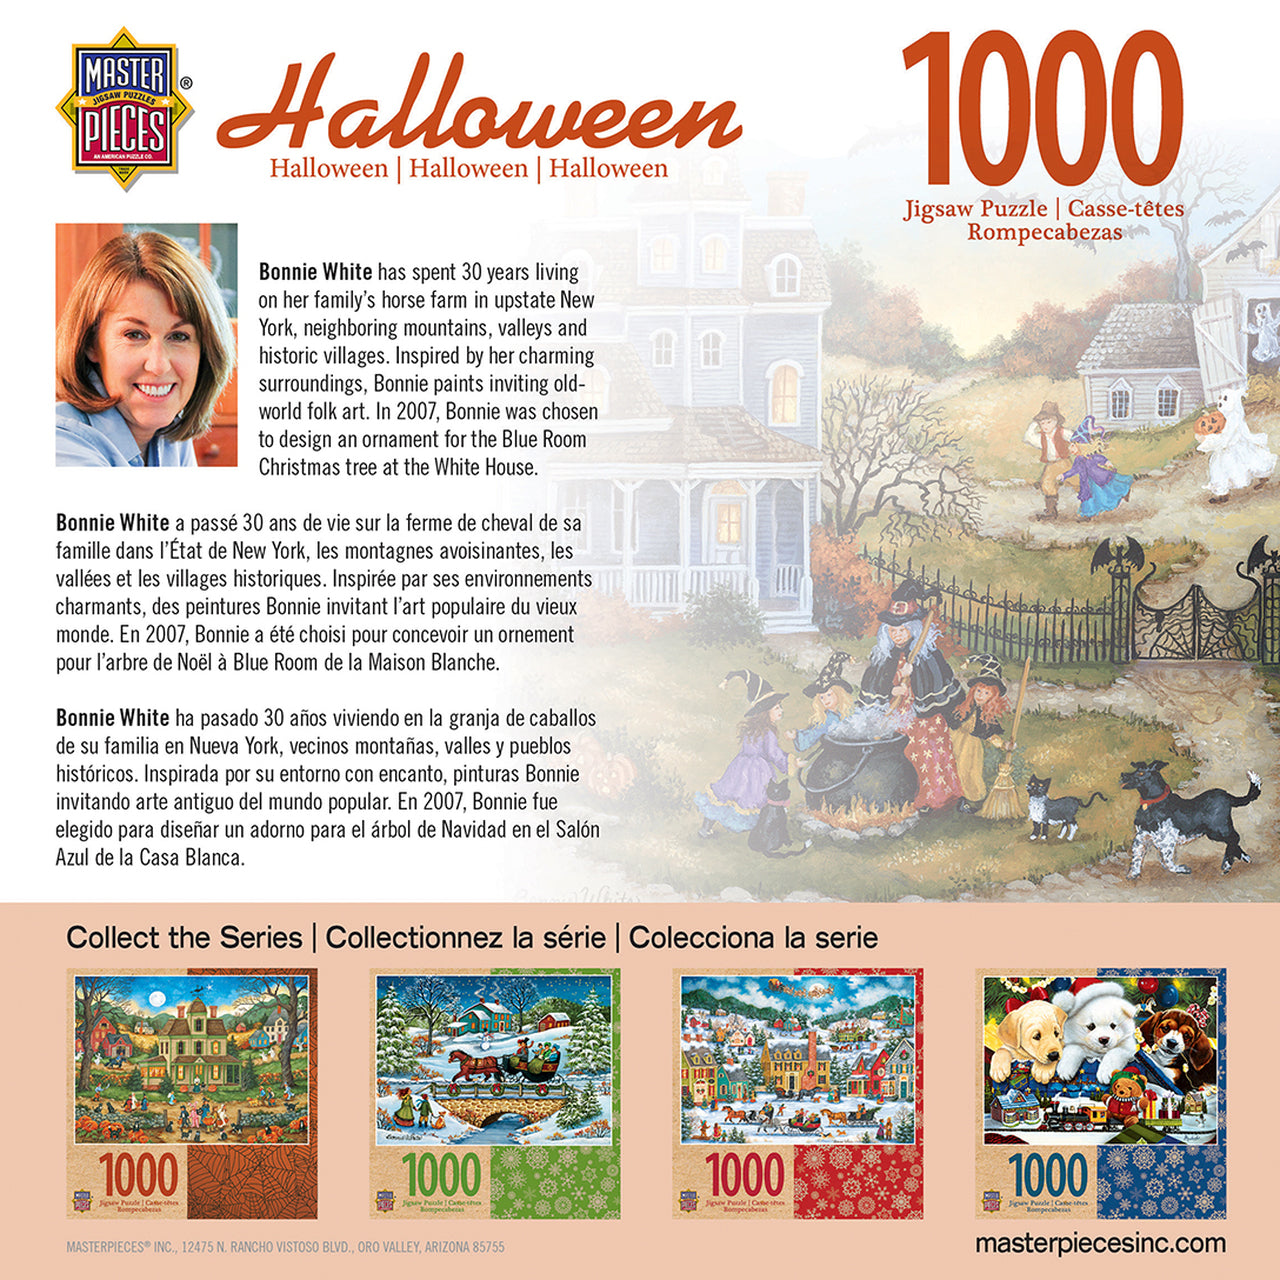 Halloween Three Little Witches 1000 Piece Jigsaw Puzzle by Masterpieces